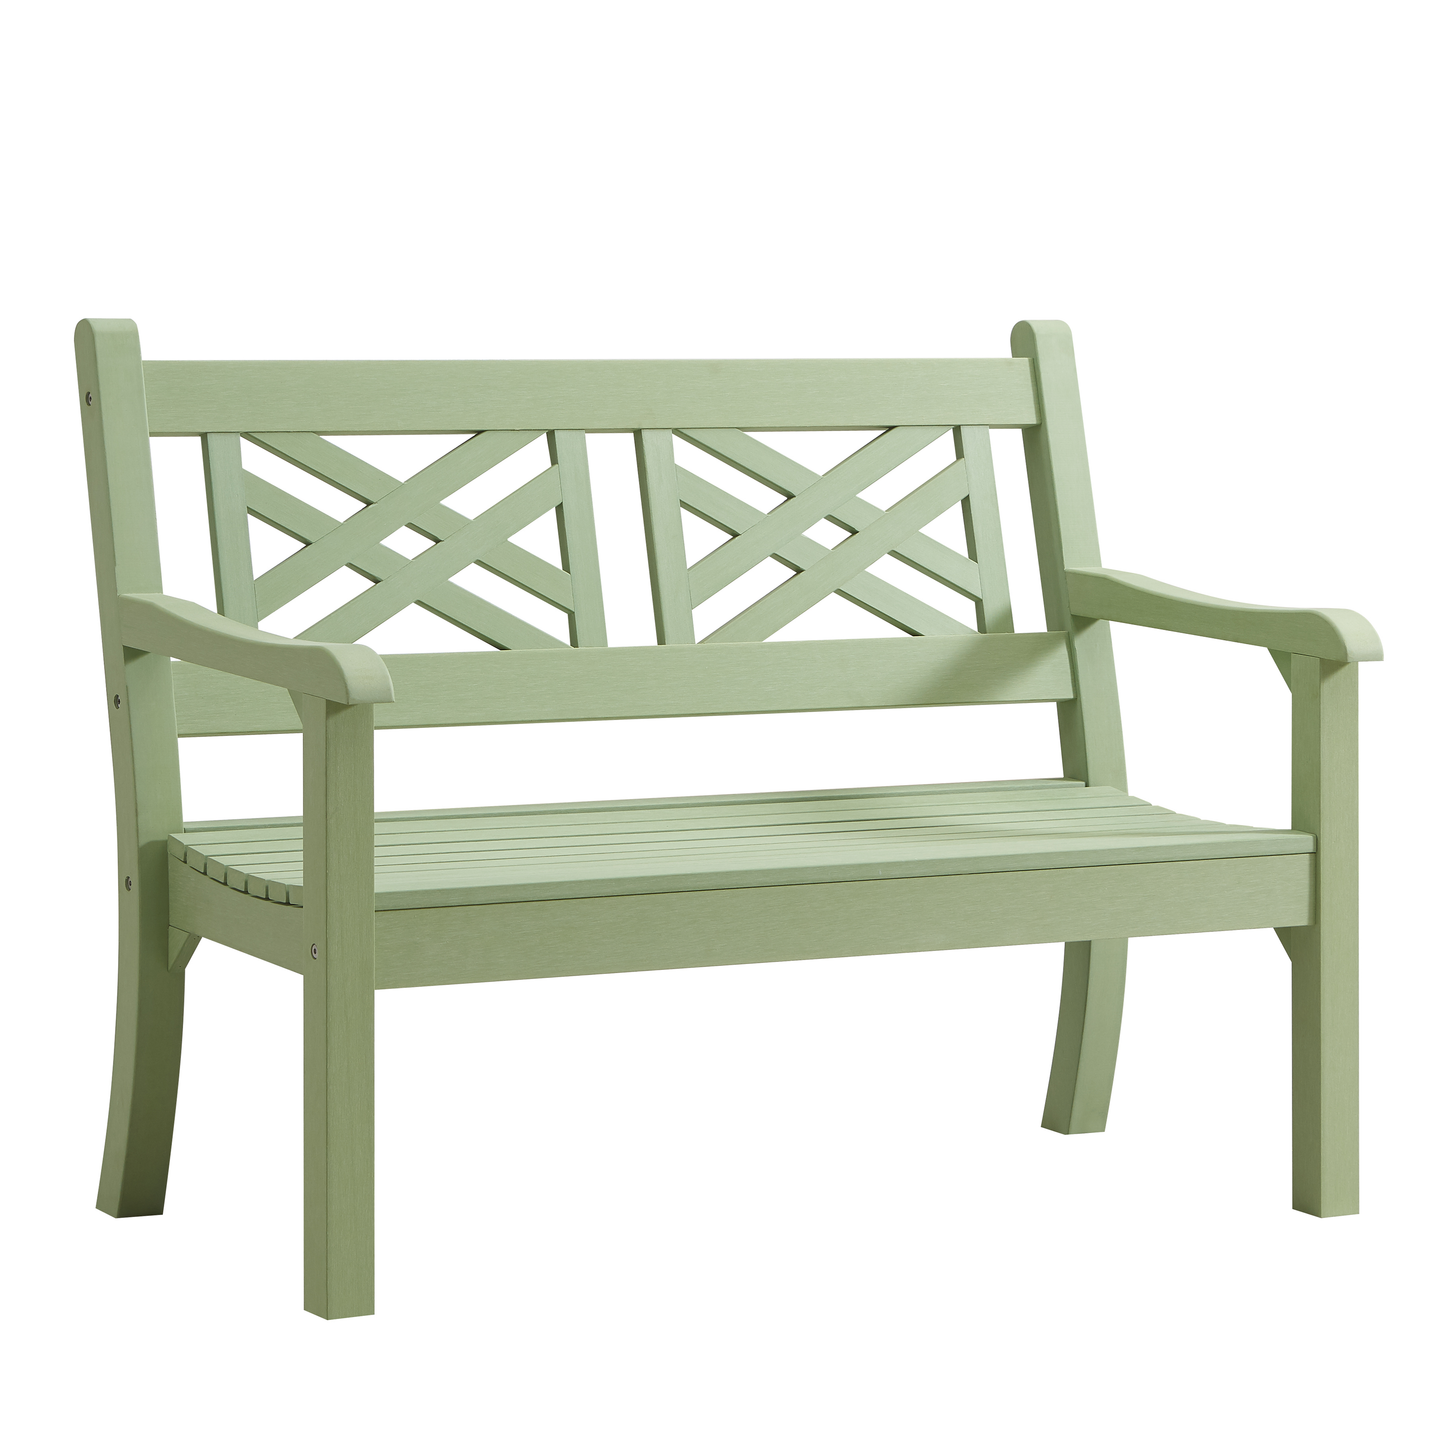 Winawood Speyside 2 Seater Wood Effect Bench - Duck Egg Green